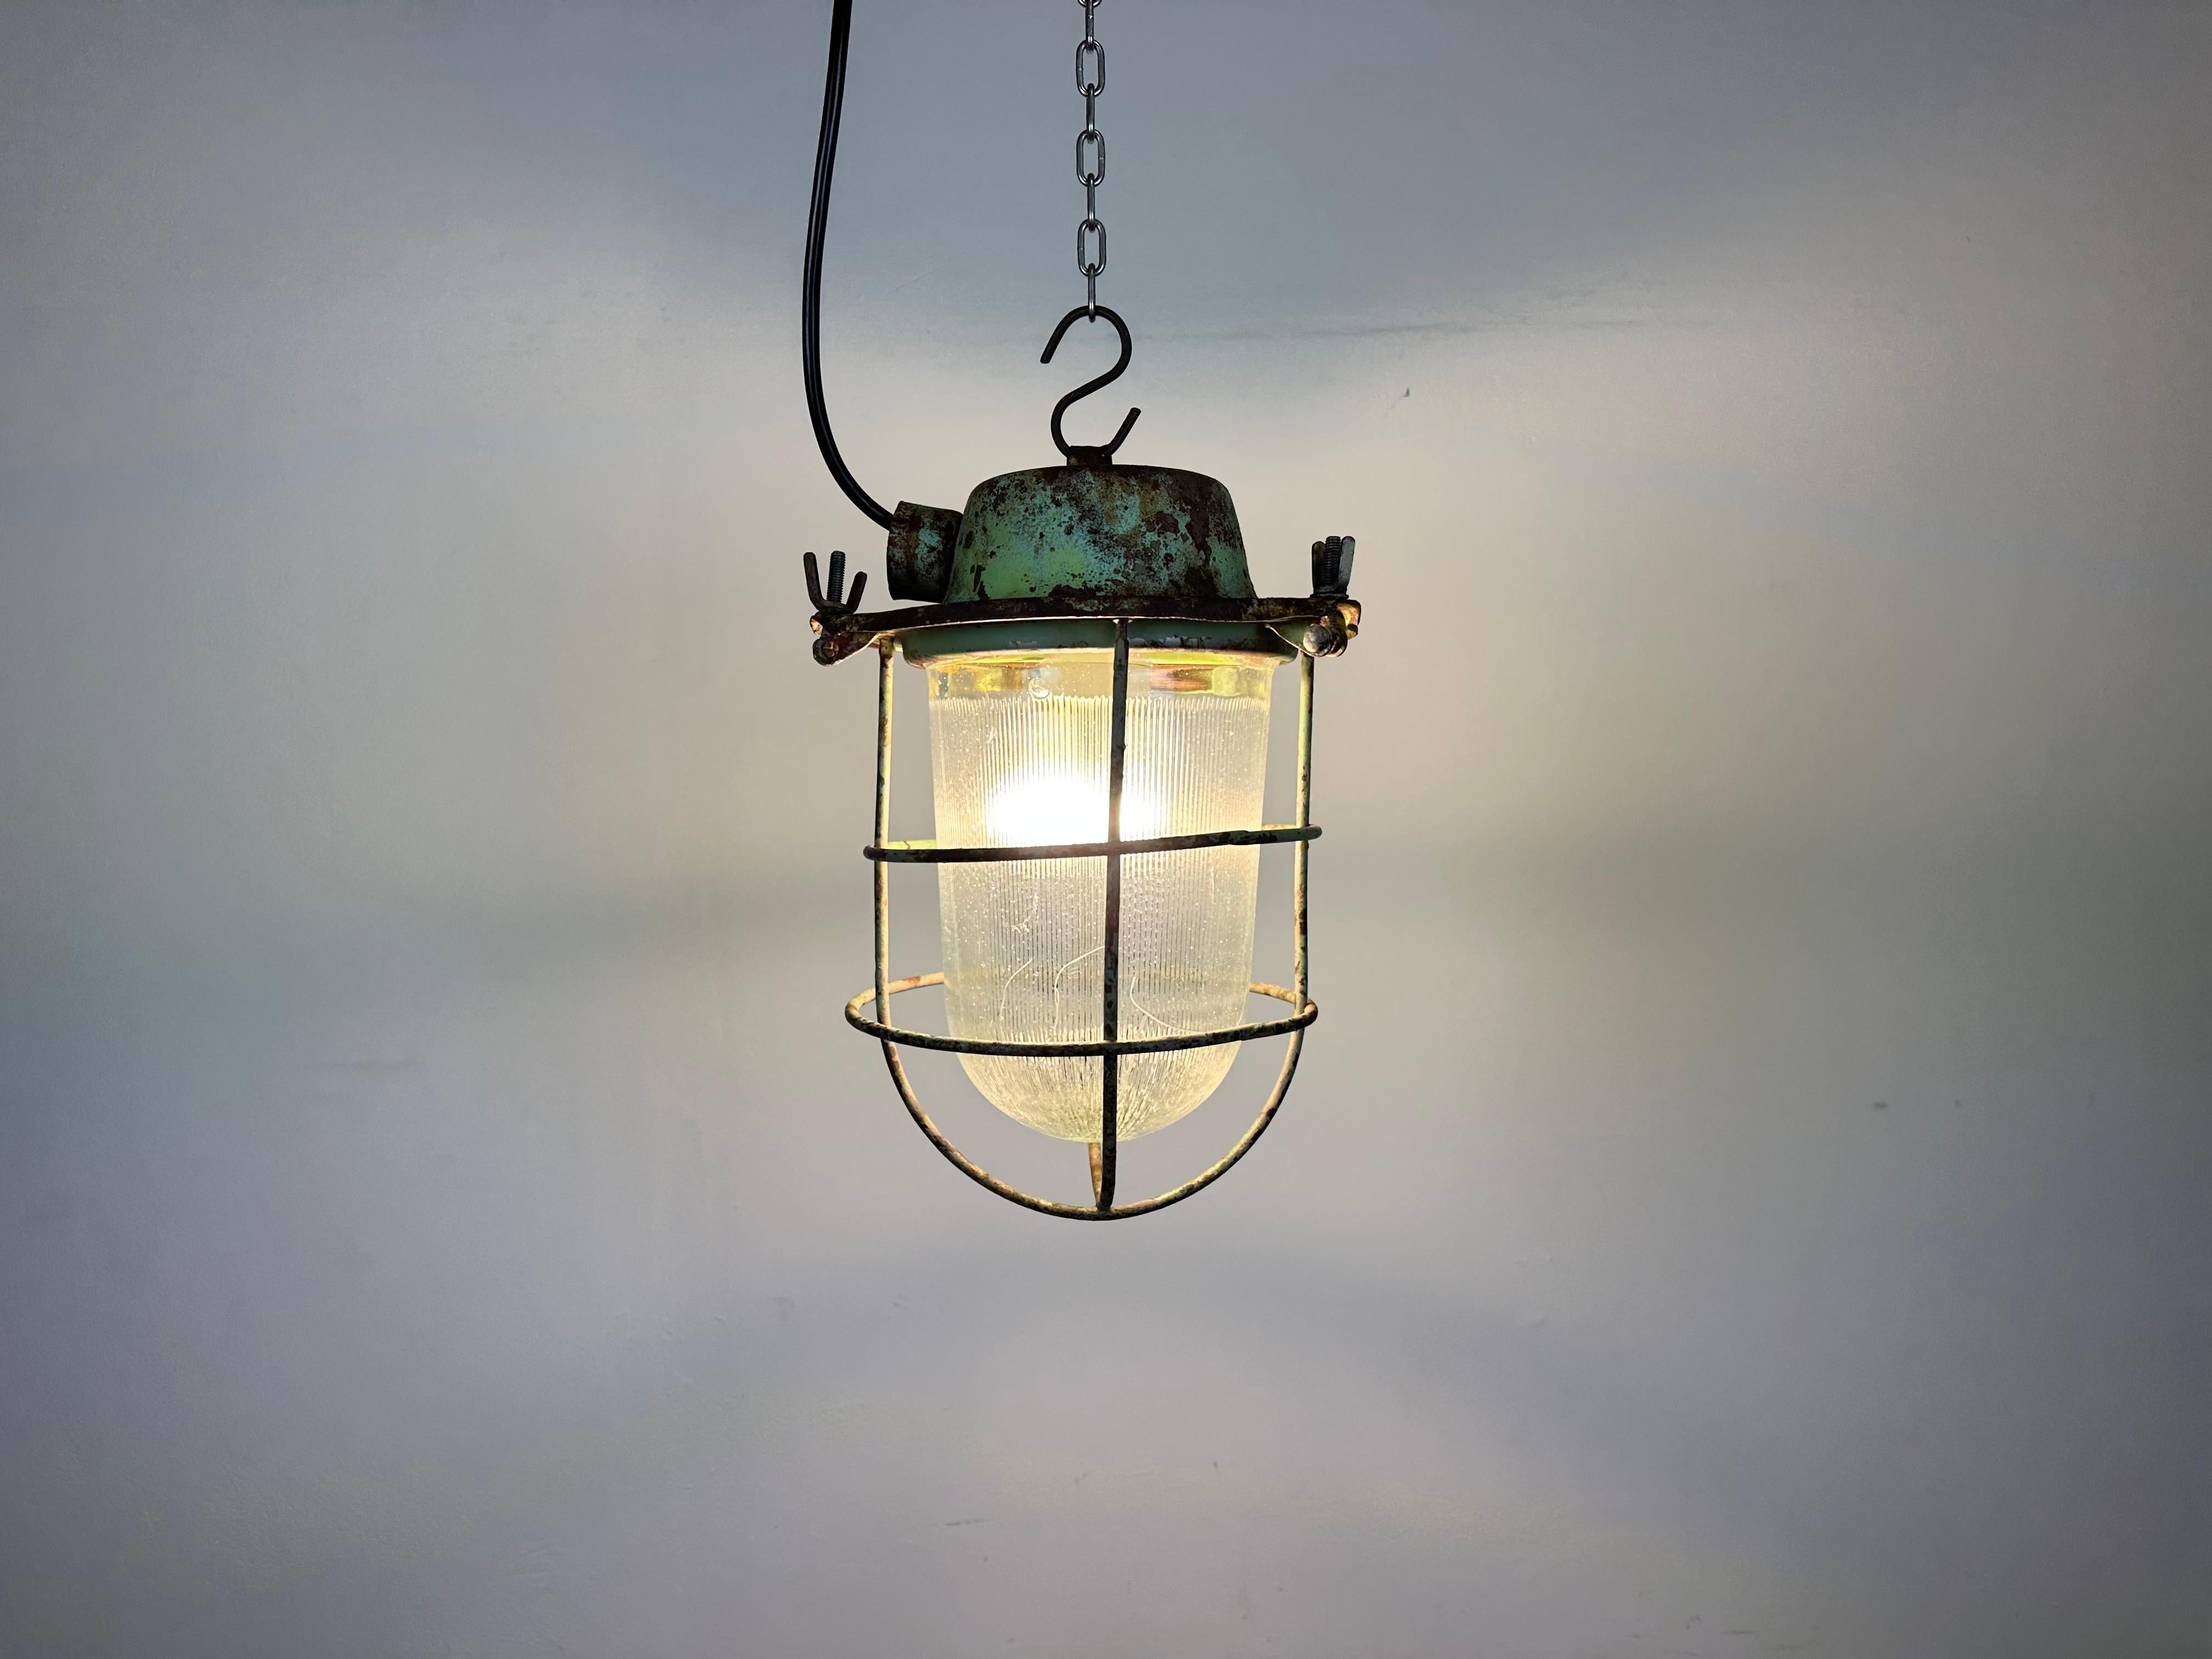 Green Industrial Soviet Bunker Pendant Light with Iron Grid, 1960s For Sale 3